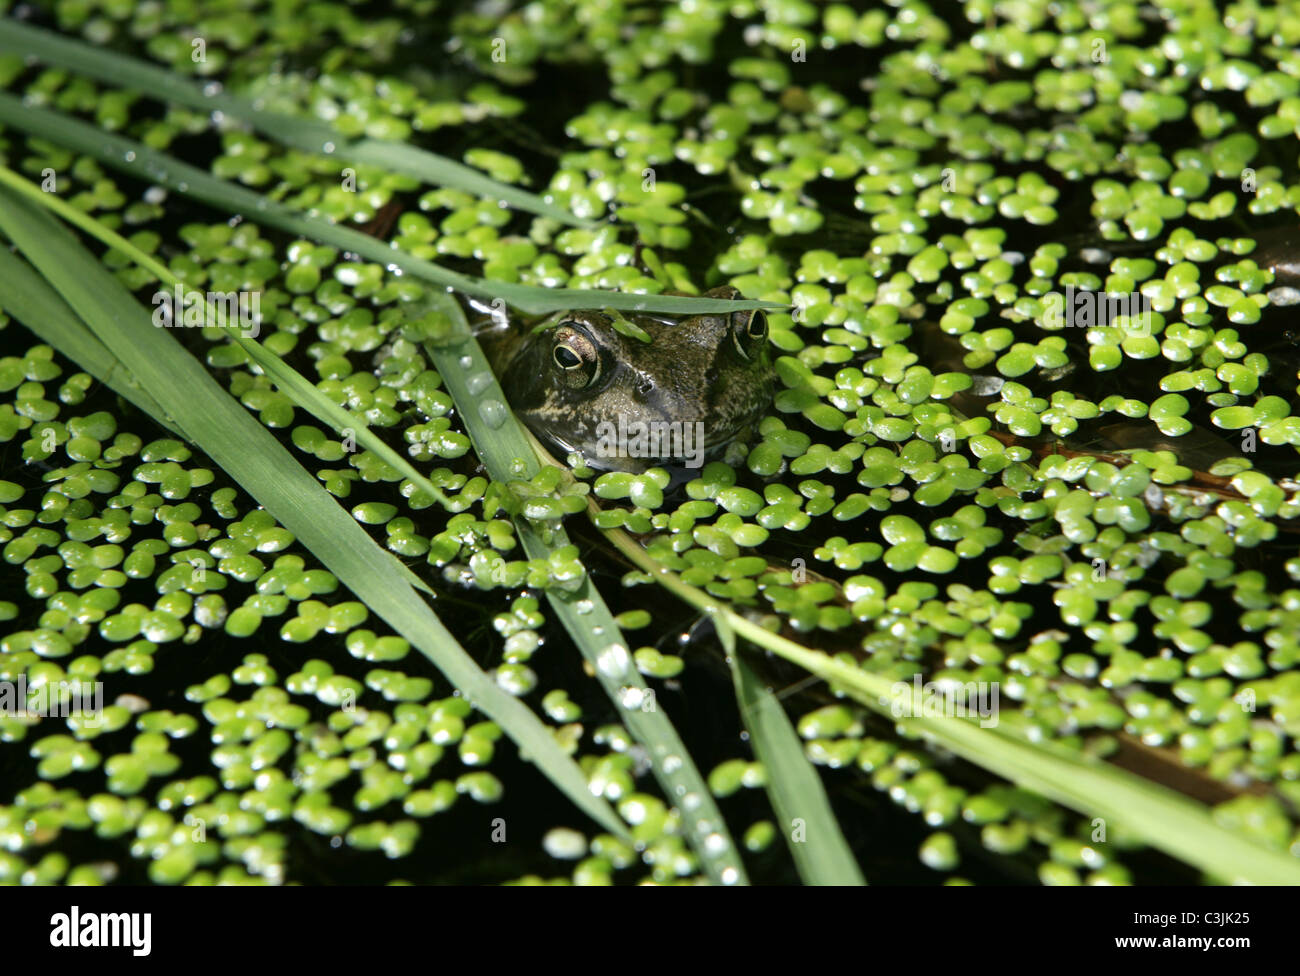 Frog camouflaged under pond weed in English garden pond Stock Photo